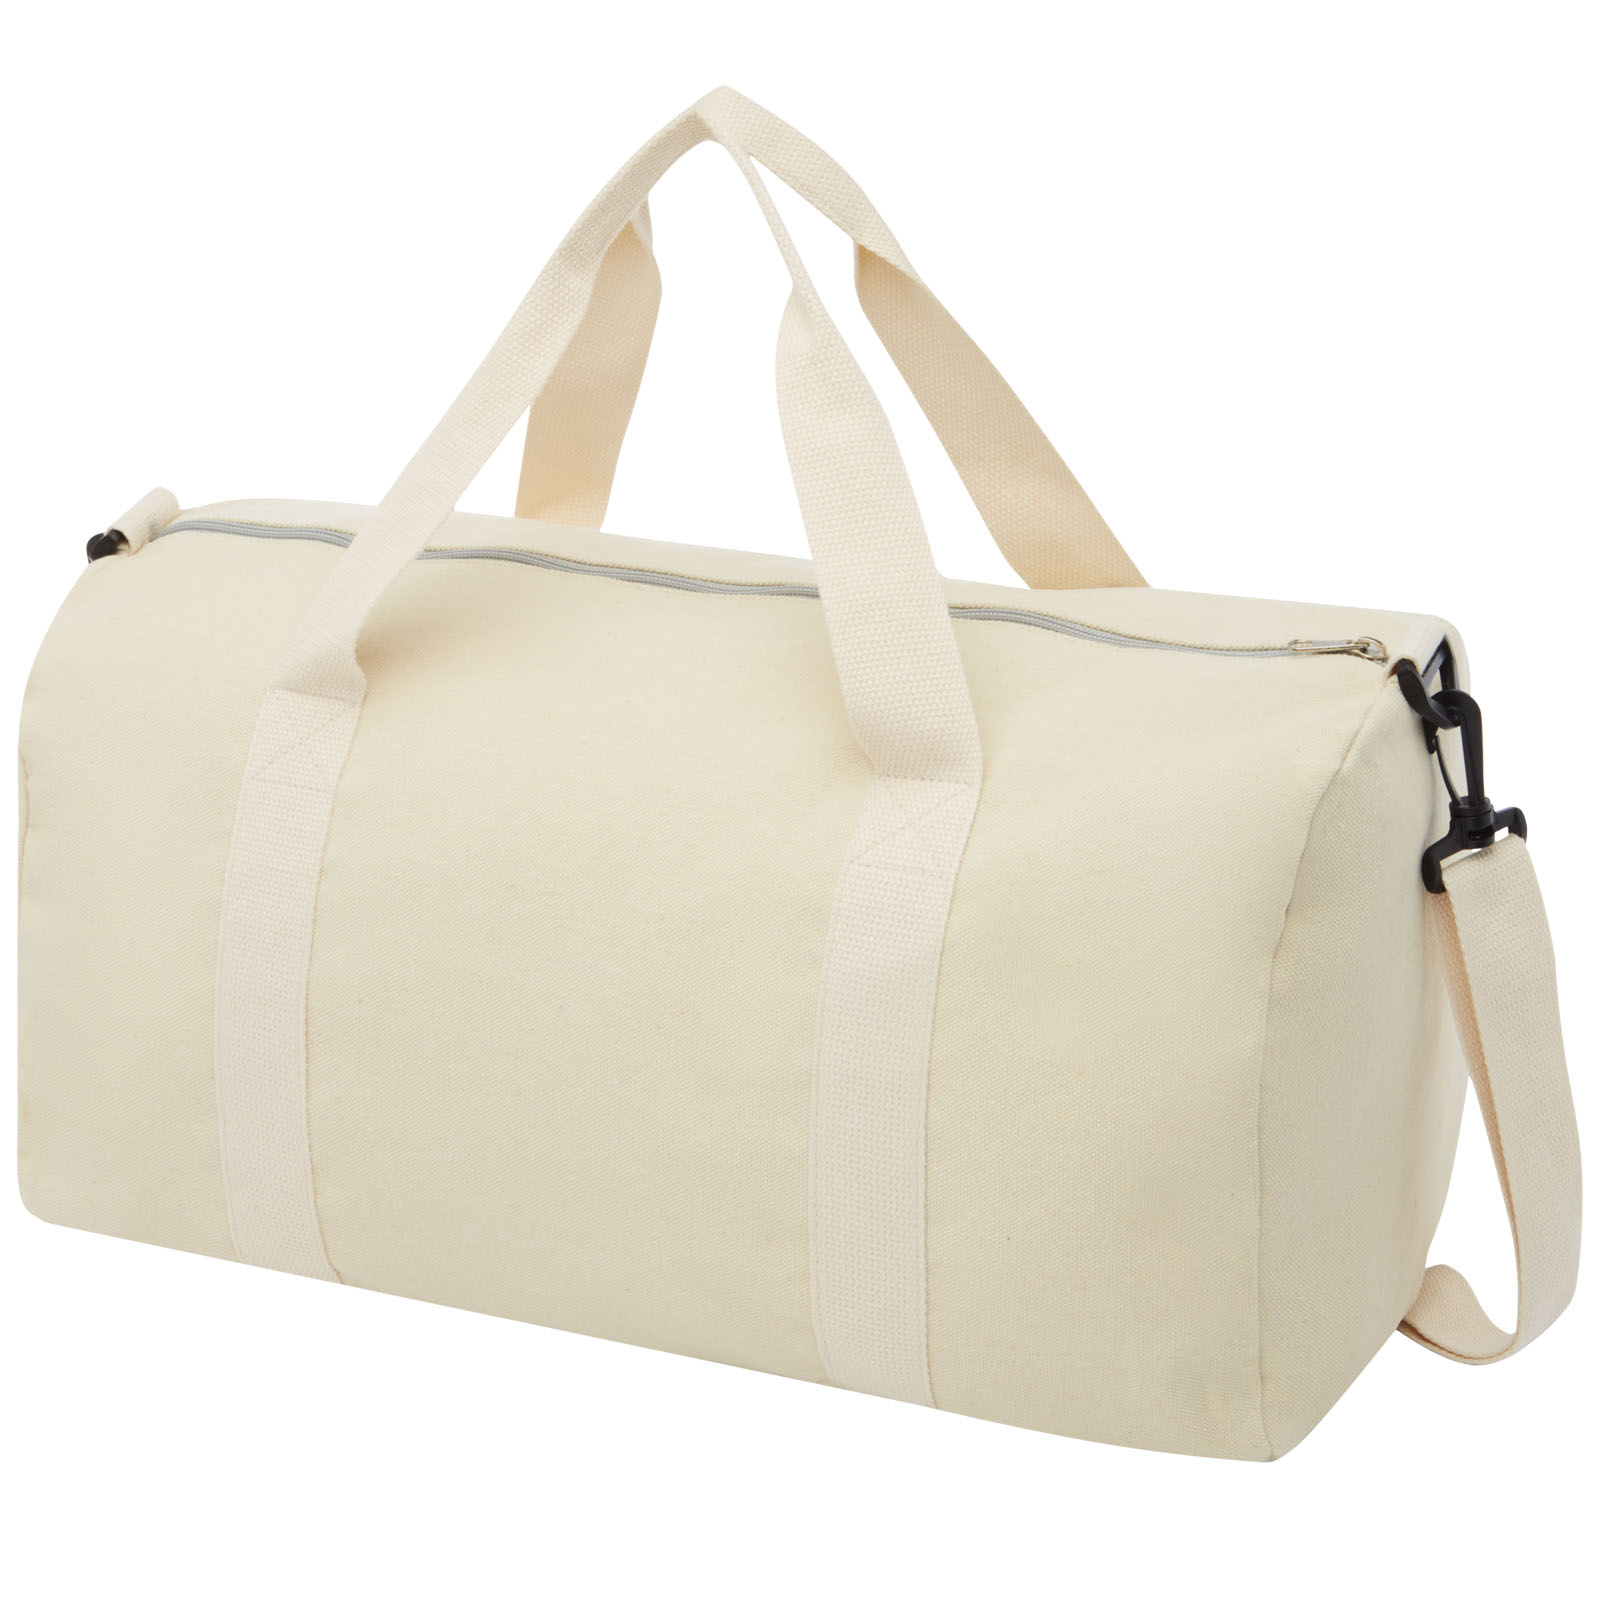 Advertising Sailor Bags - Pheebs 450 g/m² recycled cotton and polyester duffel bag 24L